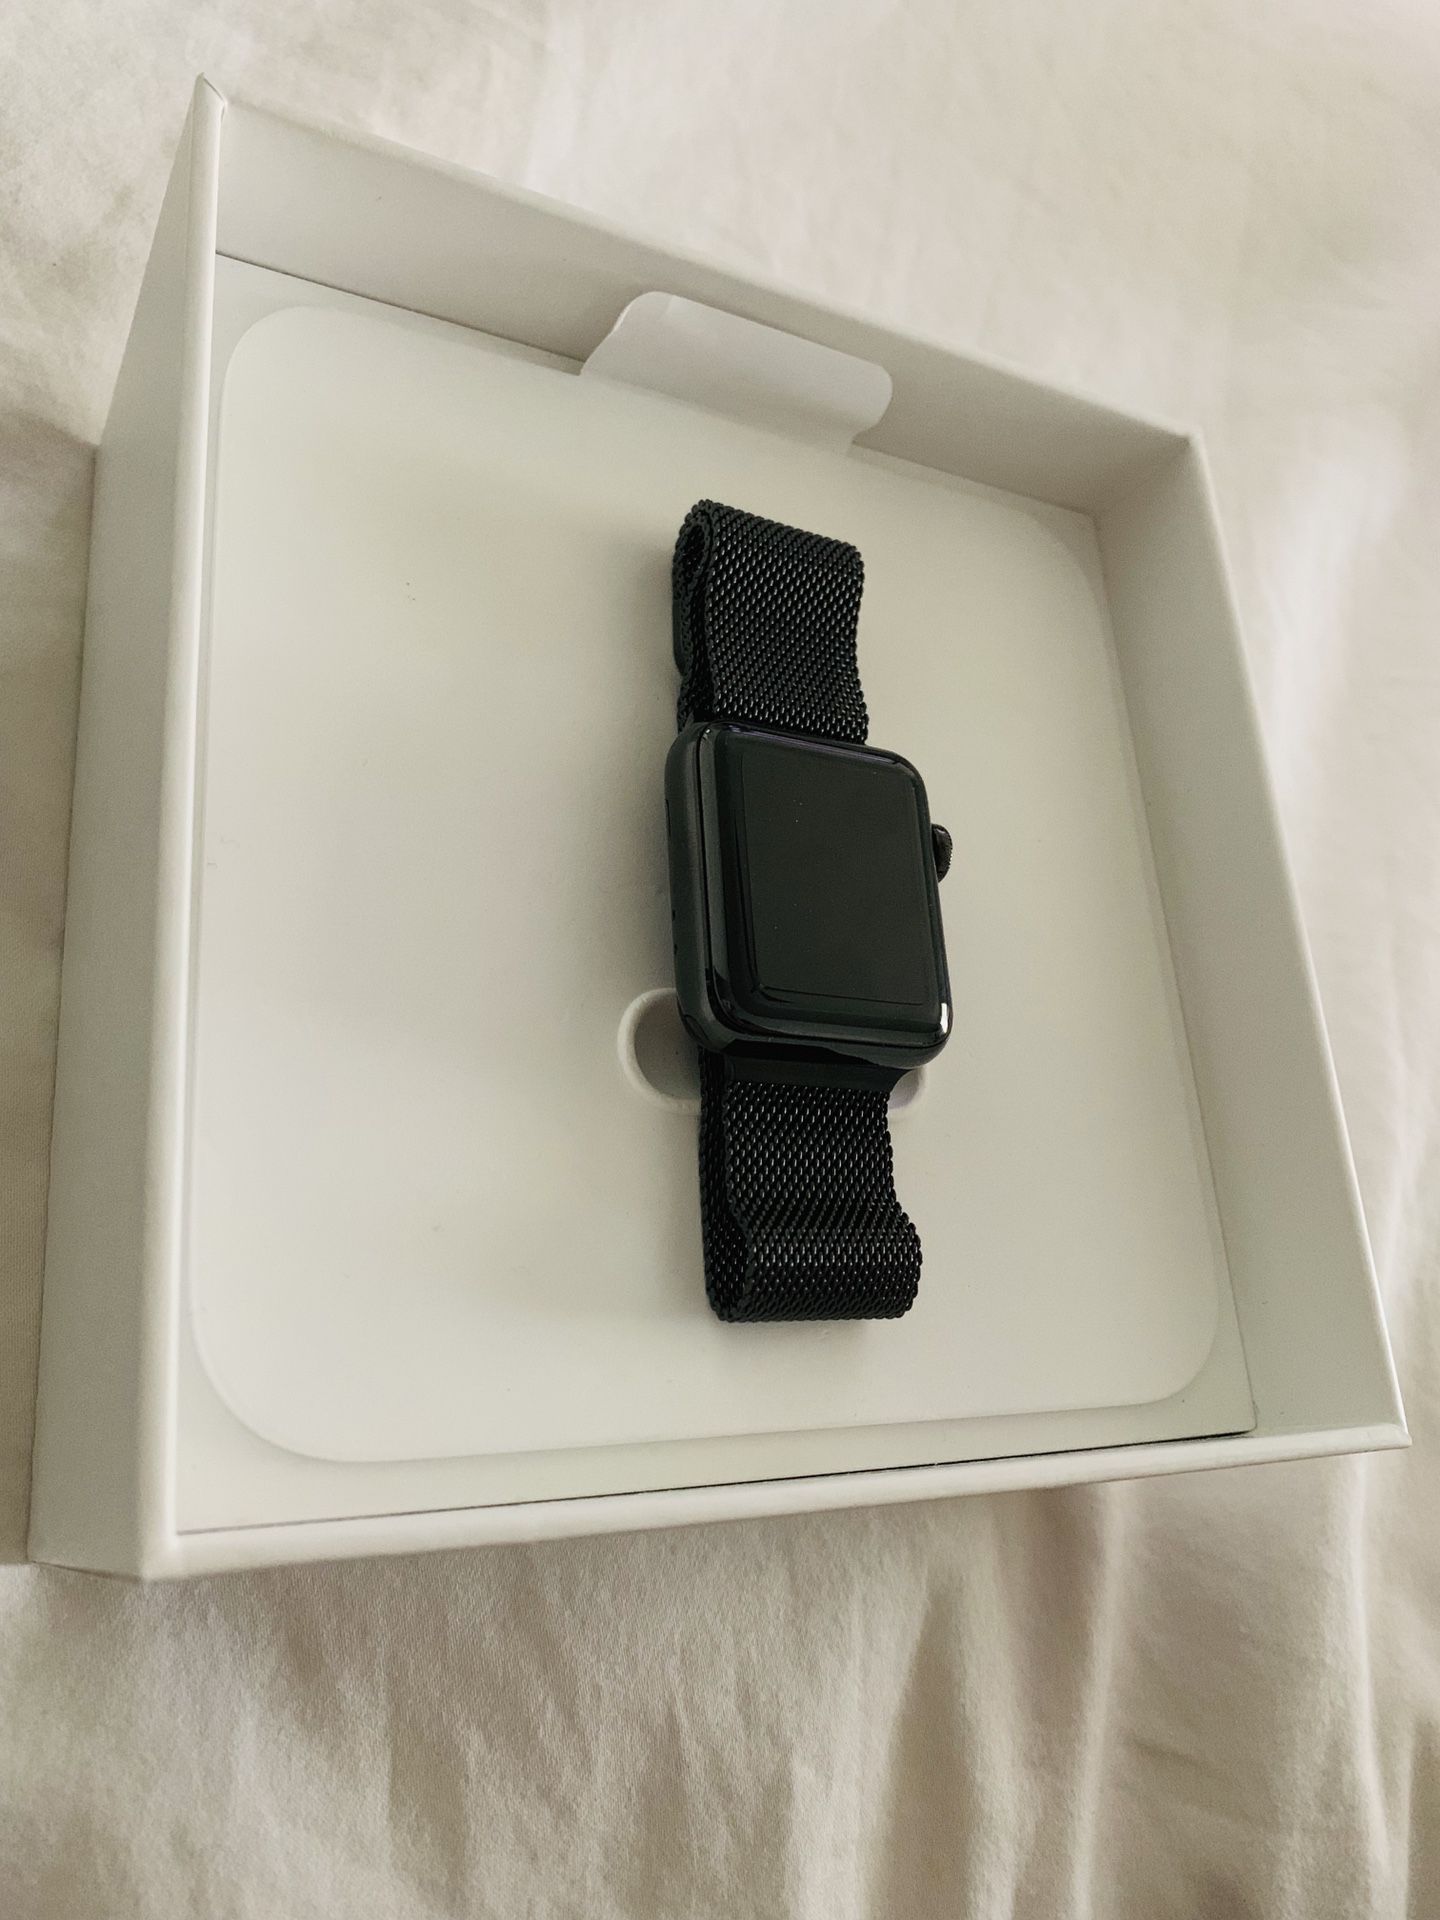 New Apple 🍏 Watch Series 3 (GPS+LTE) 38MM Stainless Steel Case - Black